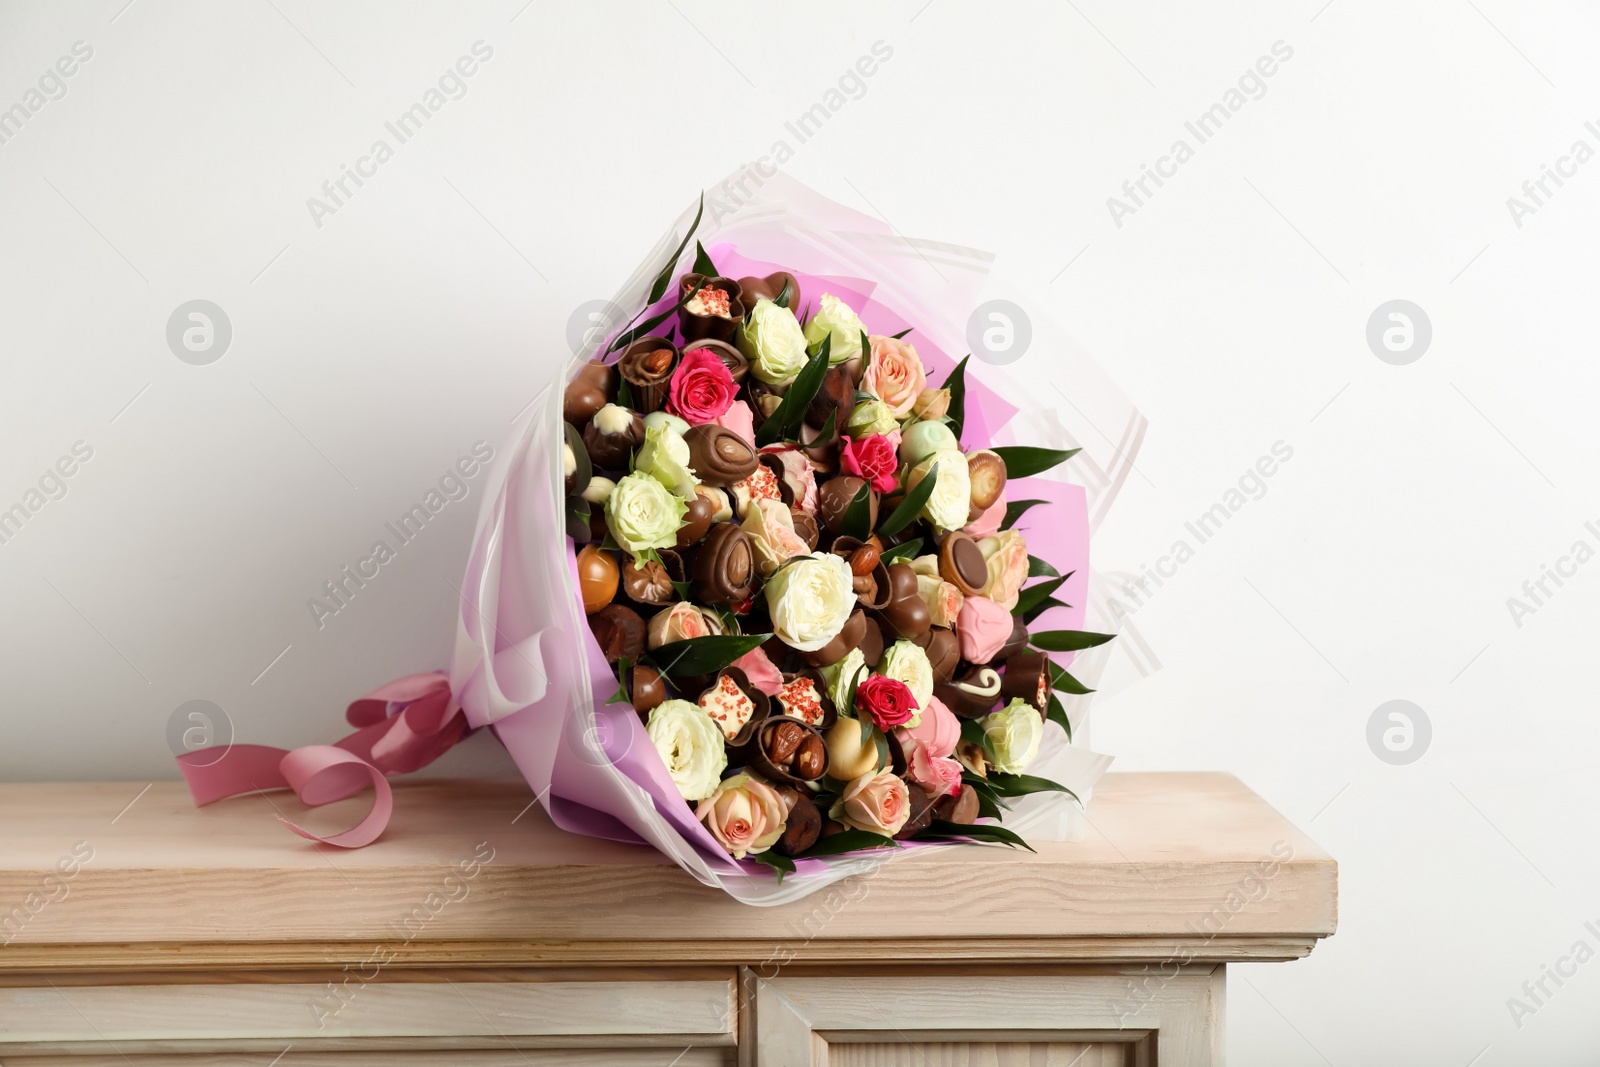 Photo of Beautiful bouquet of flowers and chocolate candies on wooden shelf against white background